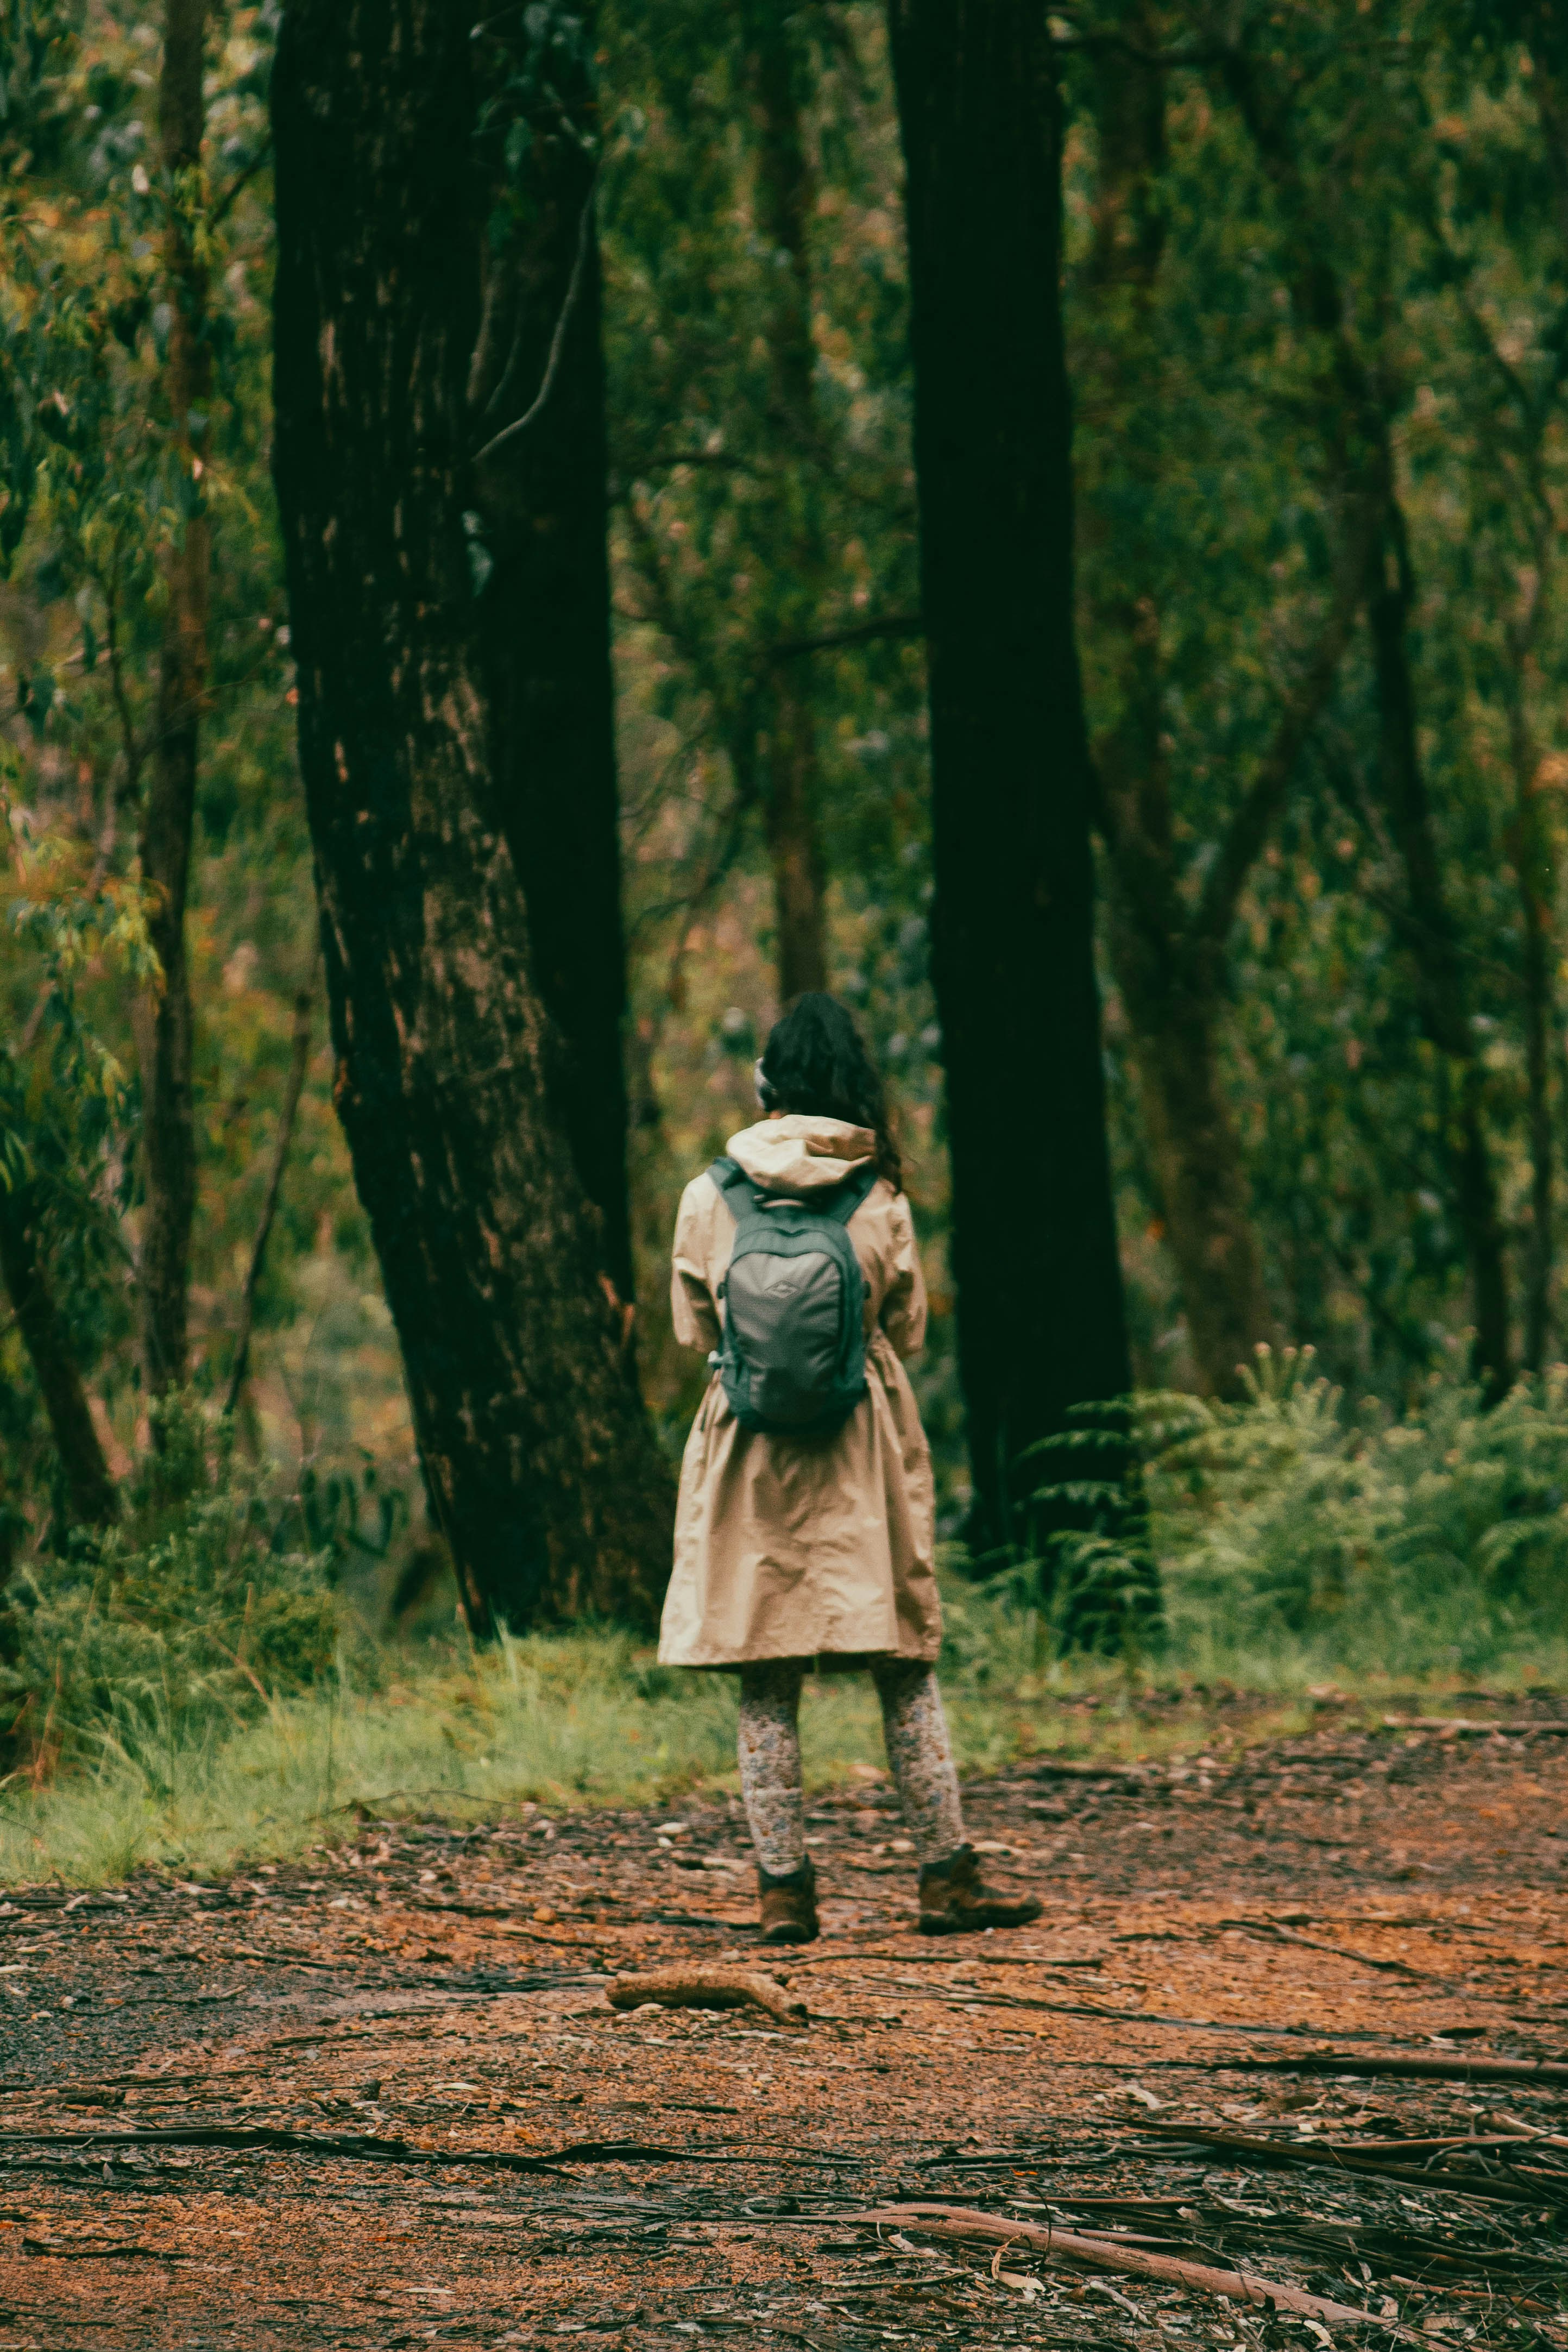 A woman with a backpack walking through a forest